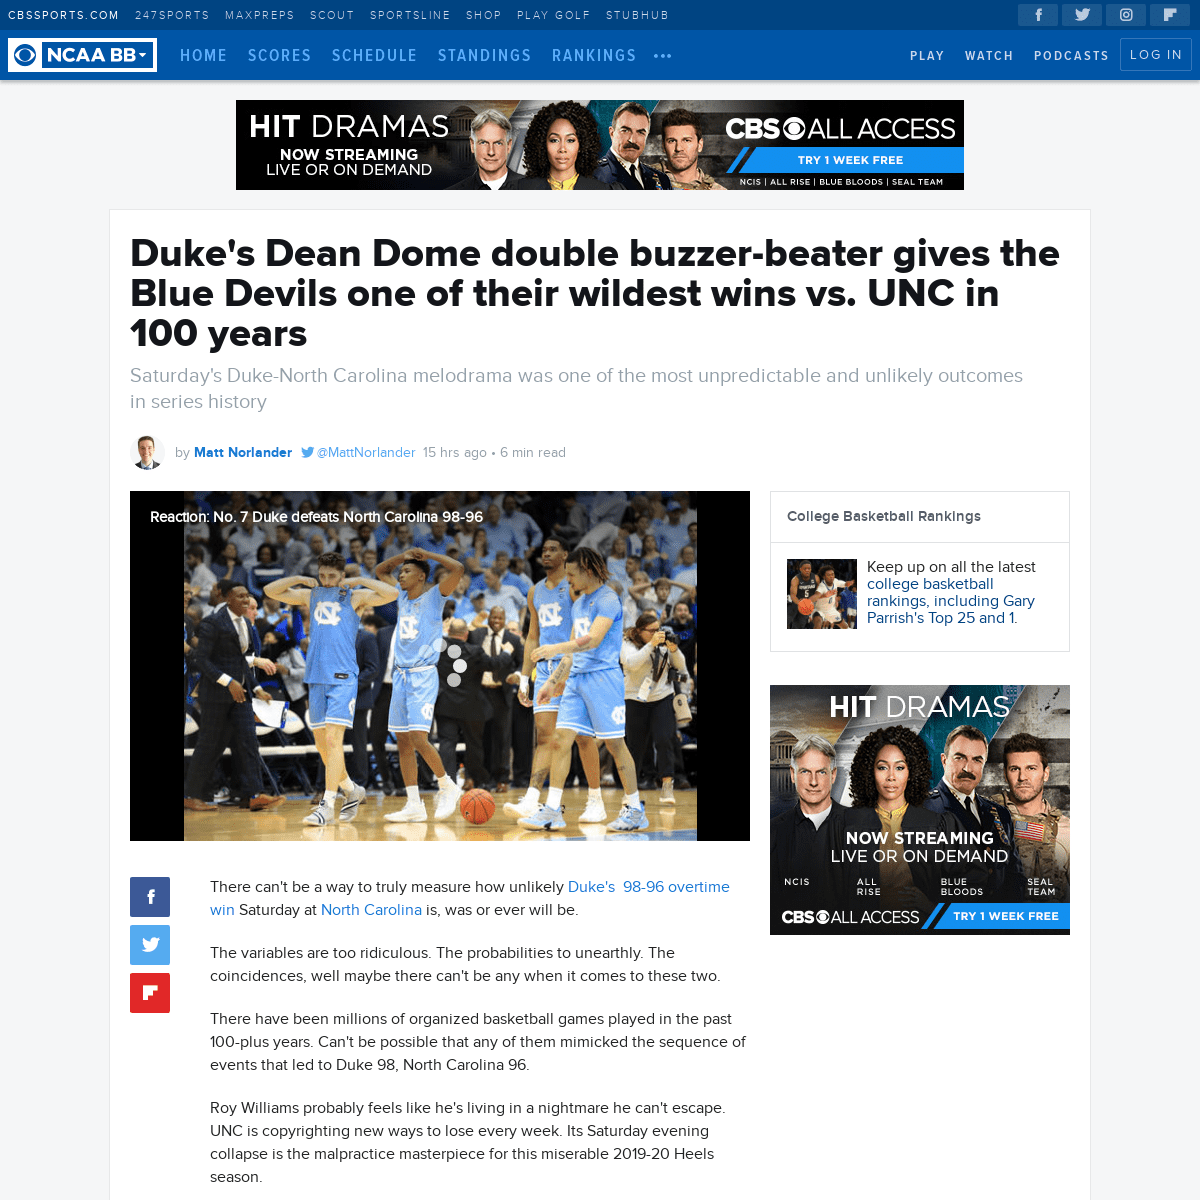 A complete backup of www.cbssports.com/college-basketball/news/dukes-dean-dome-double-buzzer-beater-gives-the-blue-devils-one-of